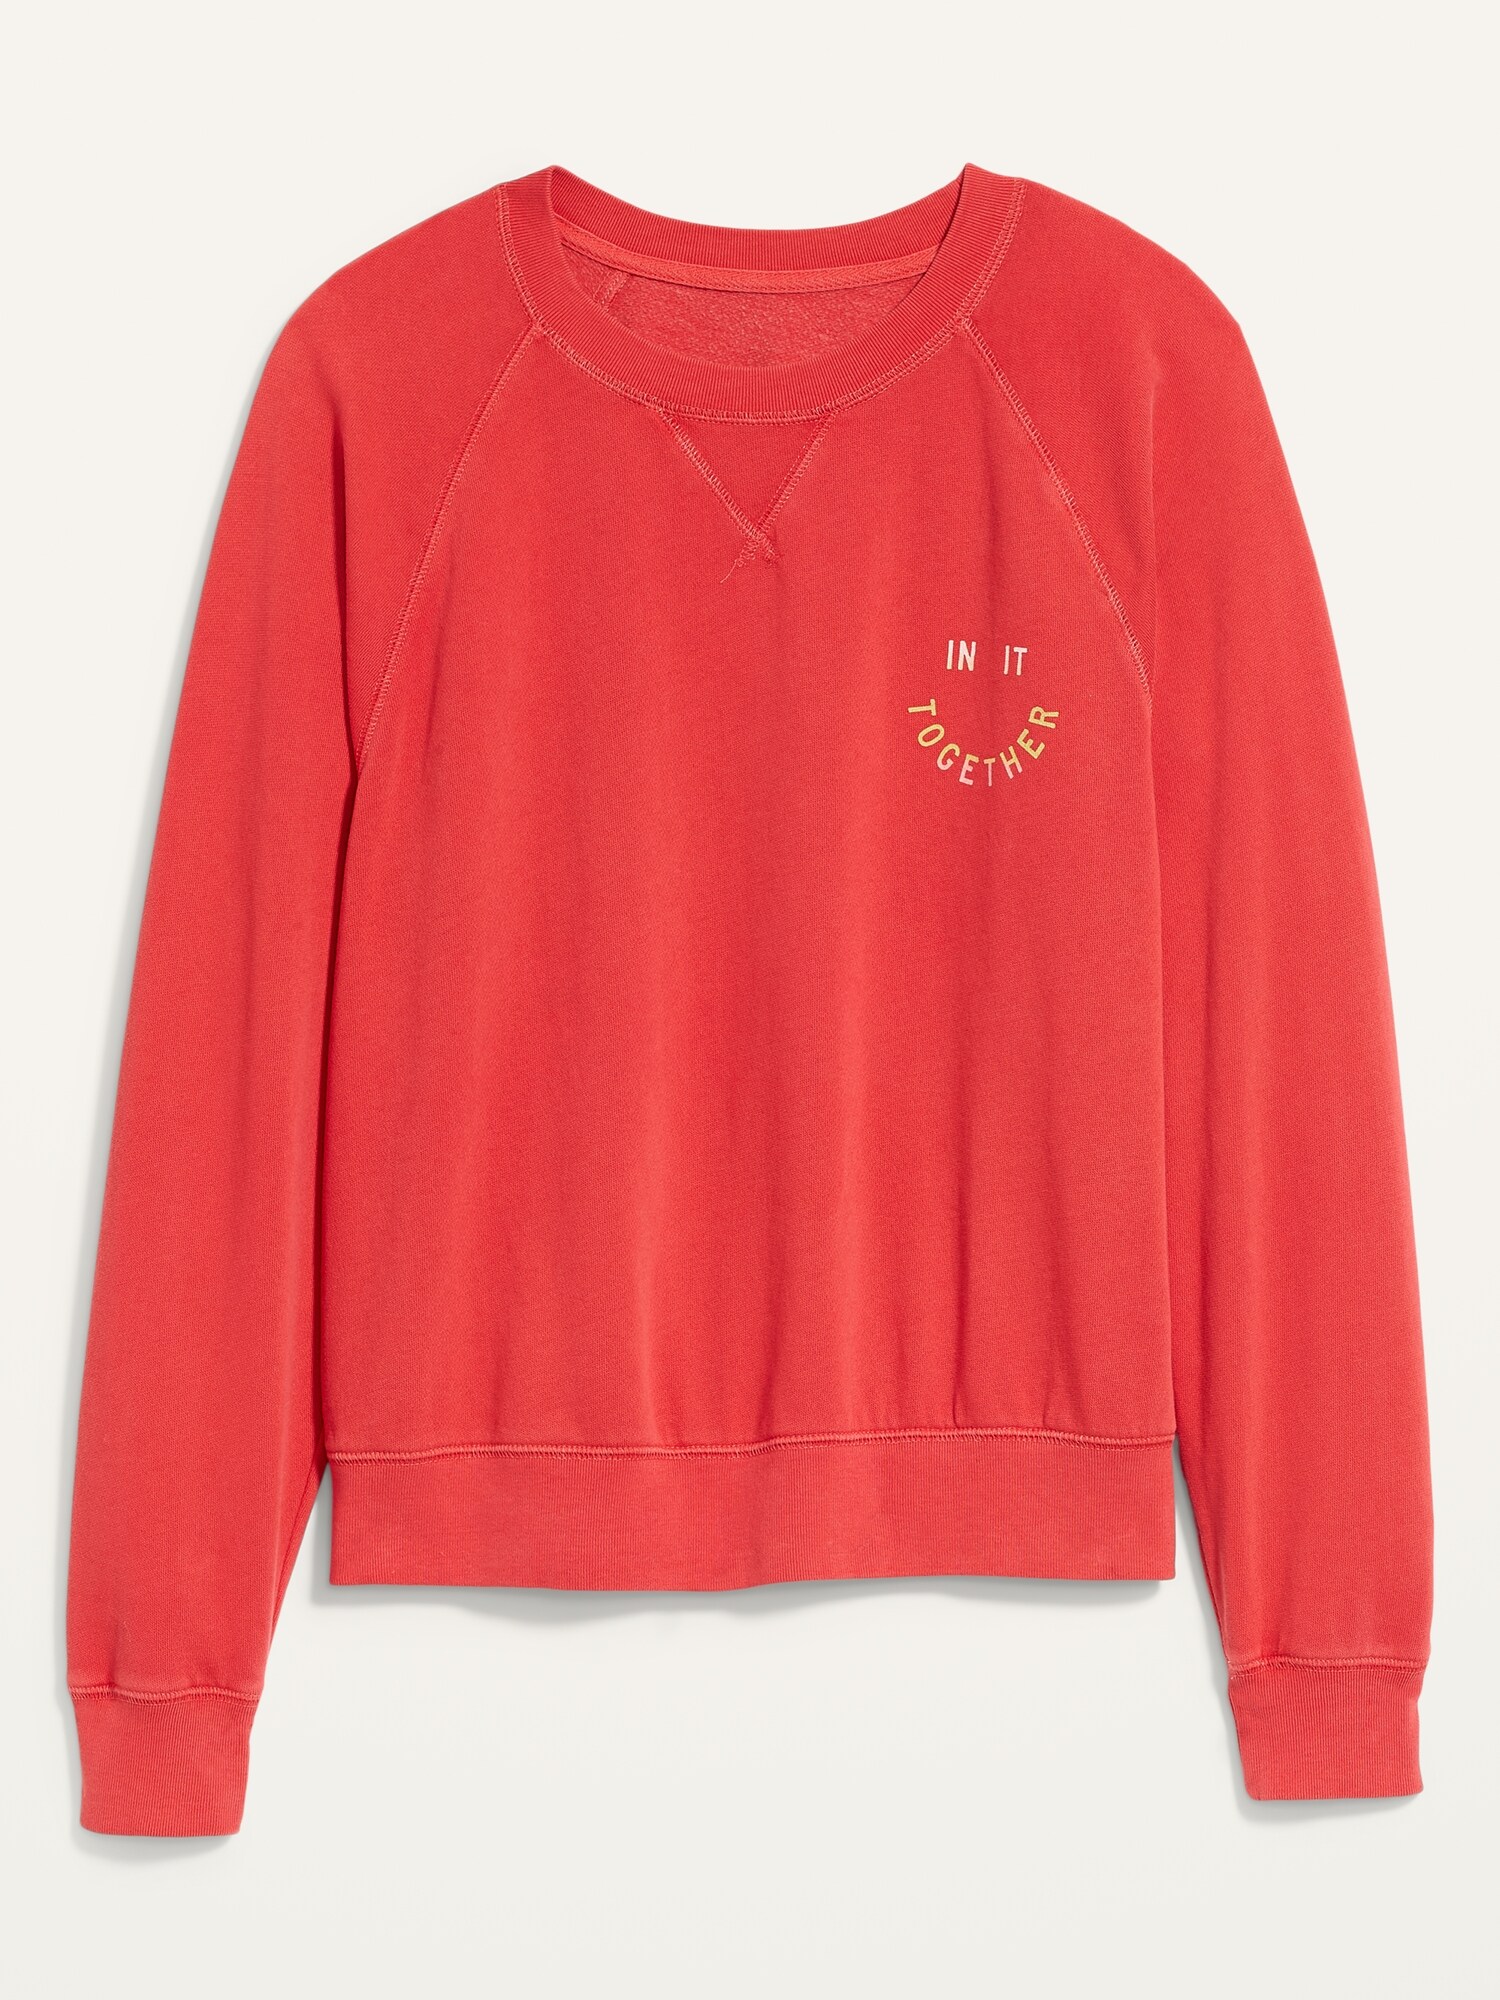 Vintage Specially Dyed Crew-Neck Sweatshirt for Women